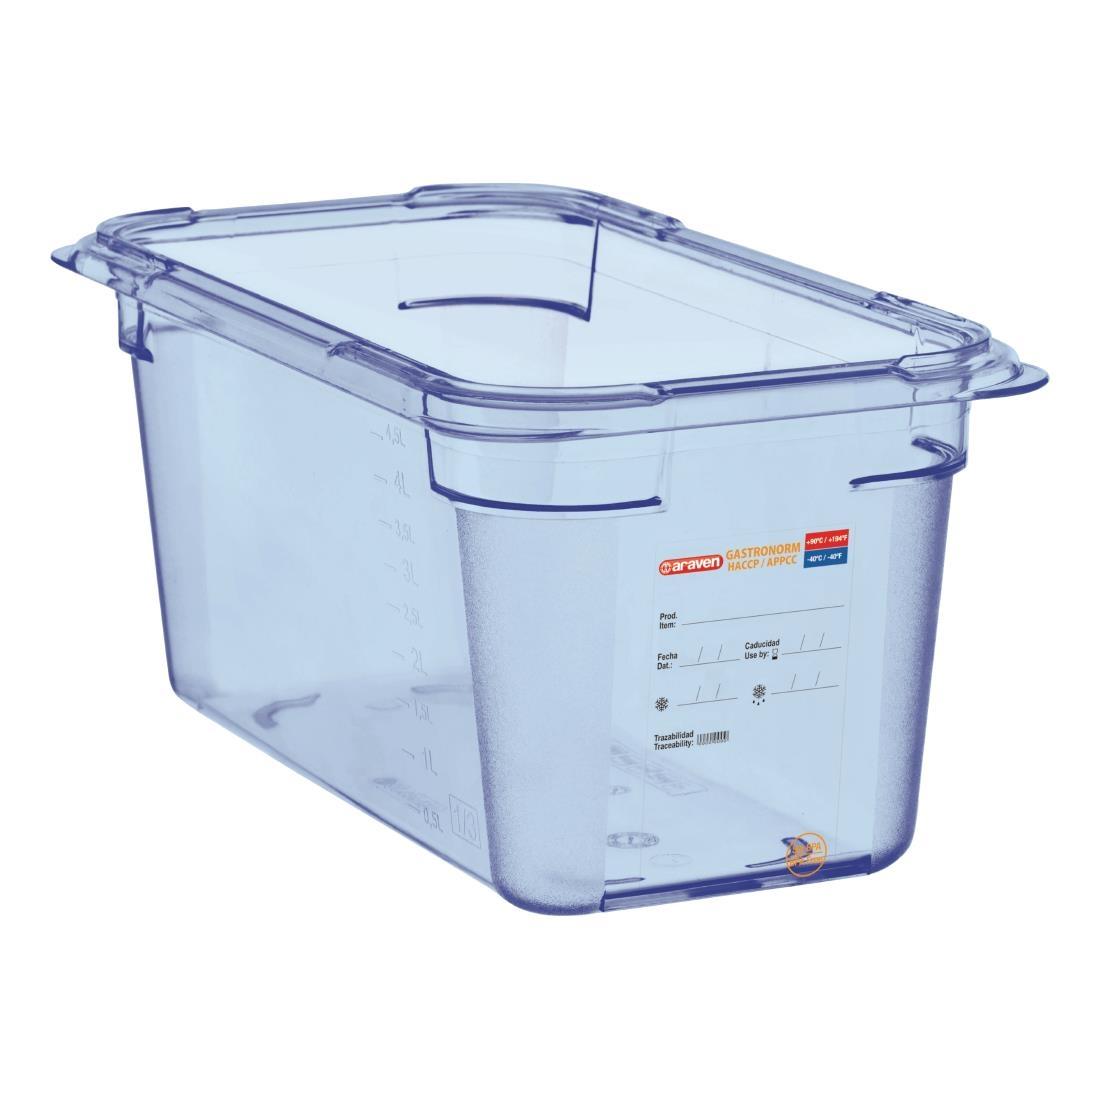 Araven ABS Food Storage Container Blue GN 1/4 150mm - GP576  - 1